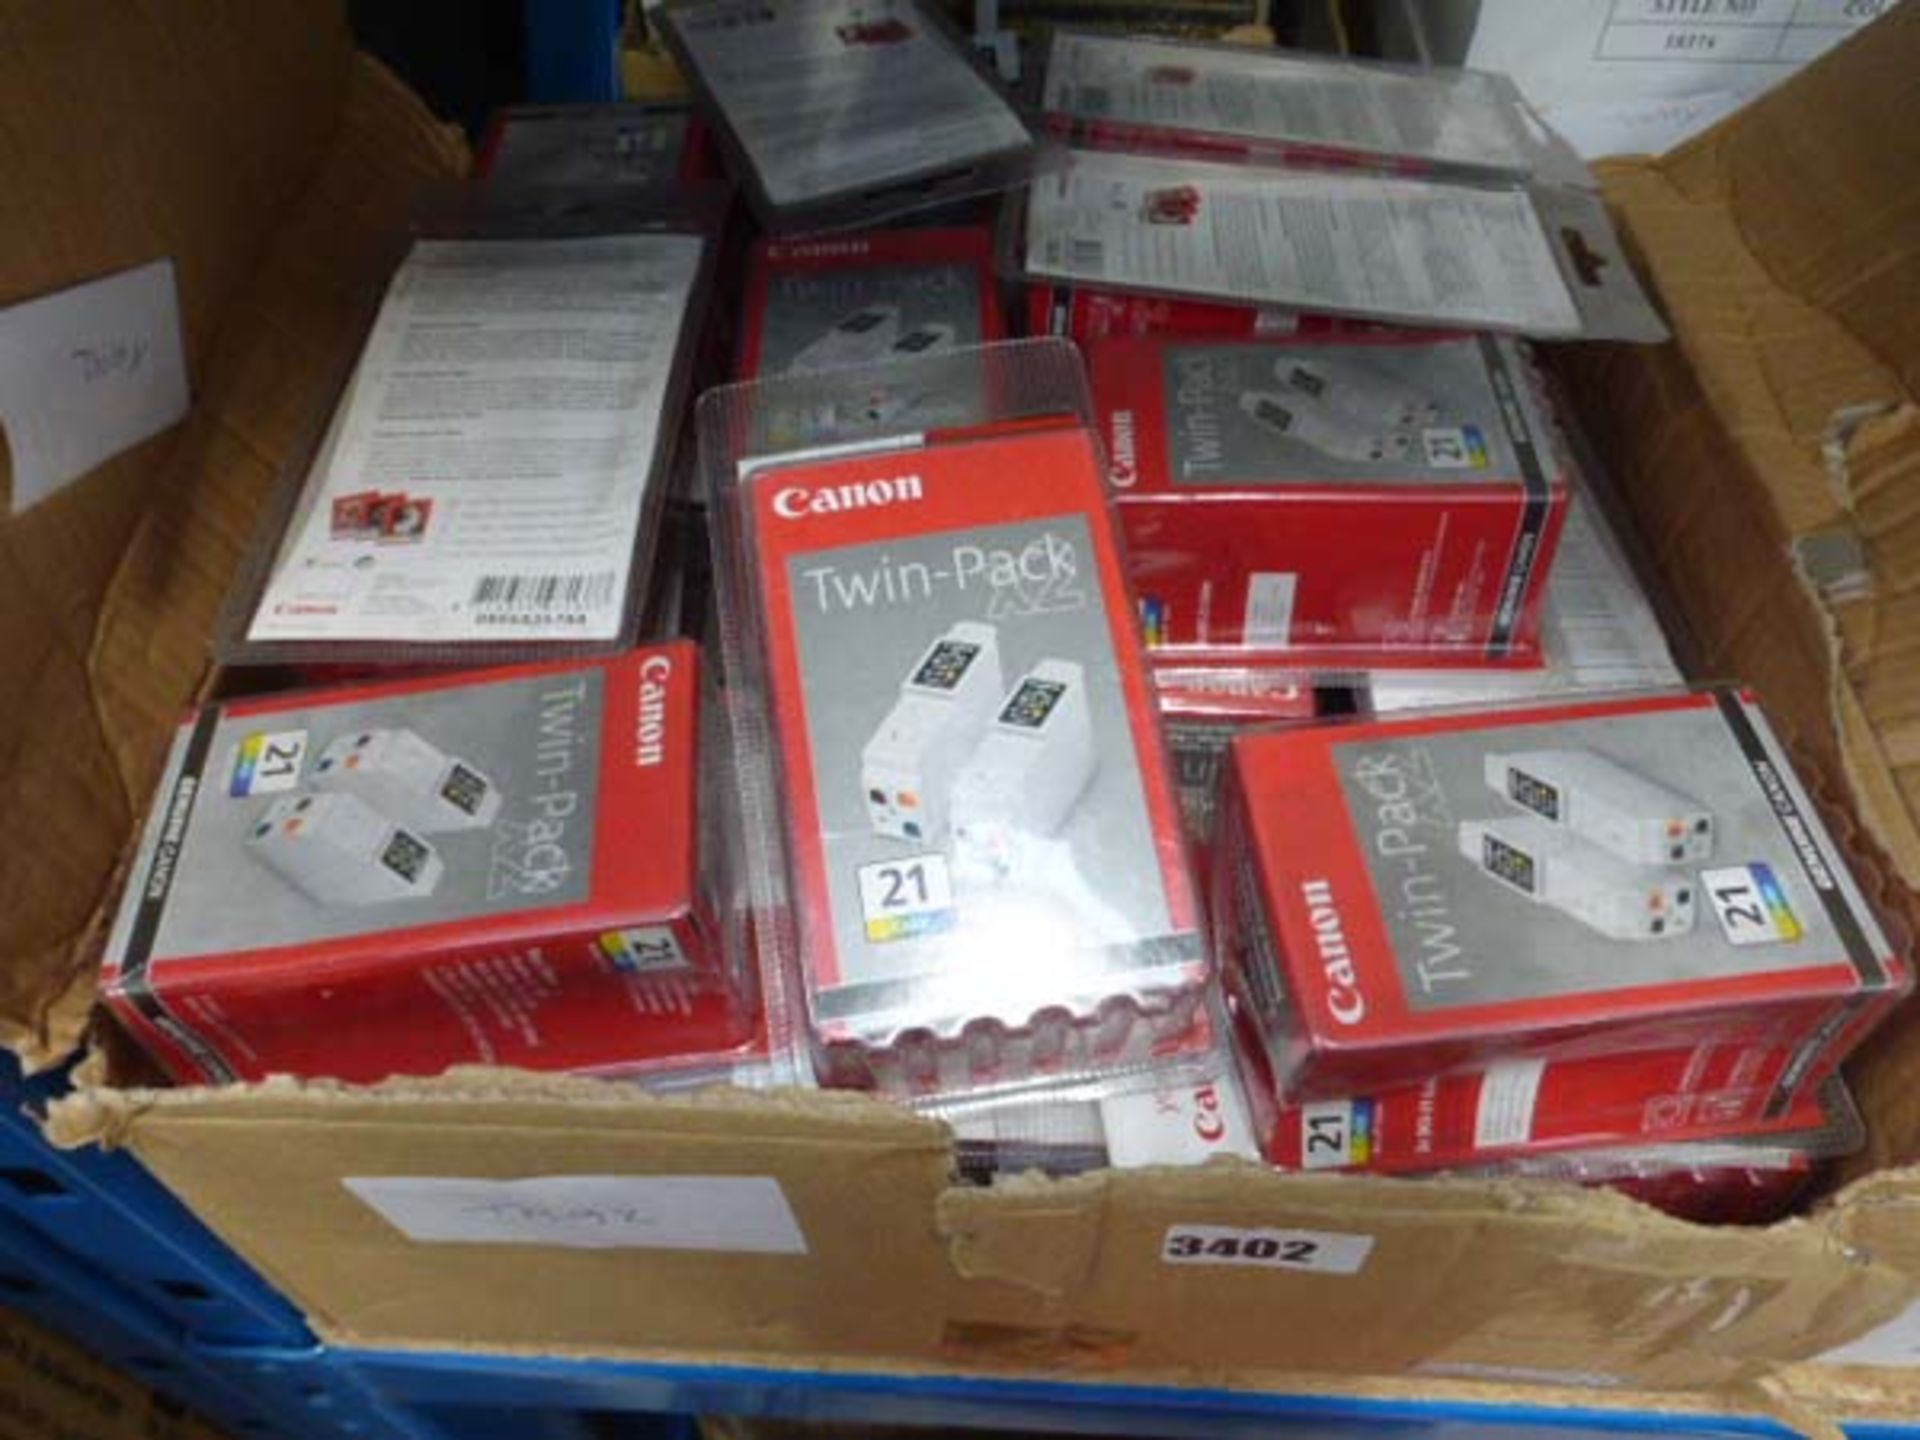 Box containing Canon twin pack cartridges